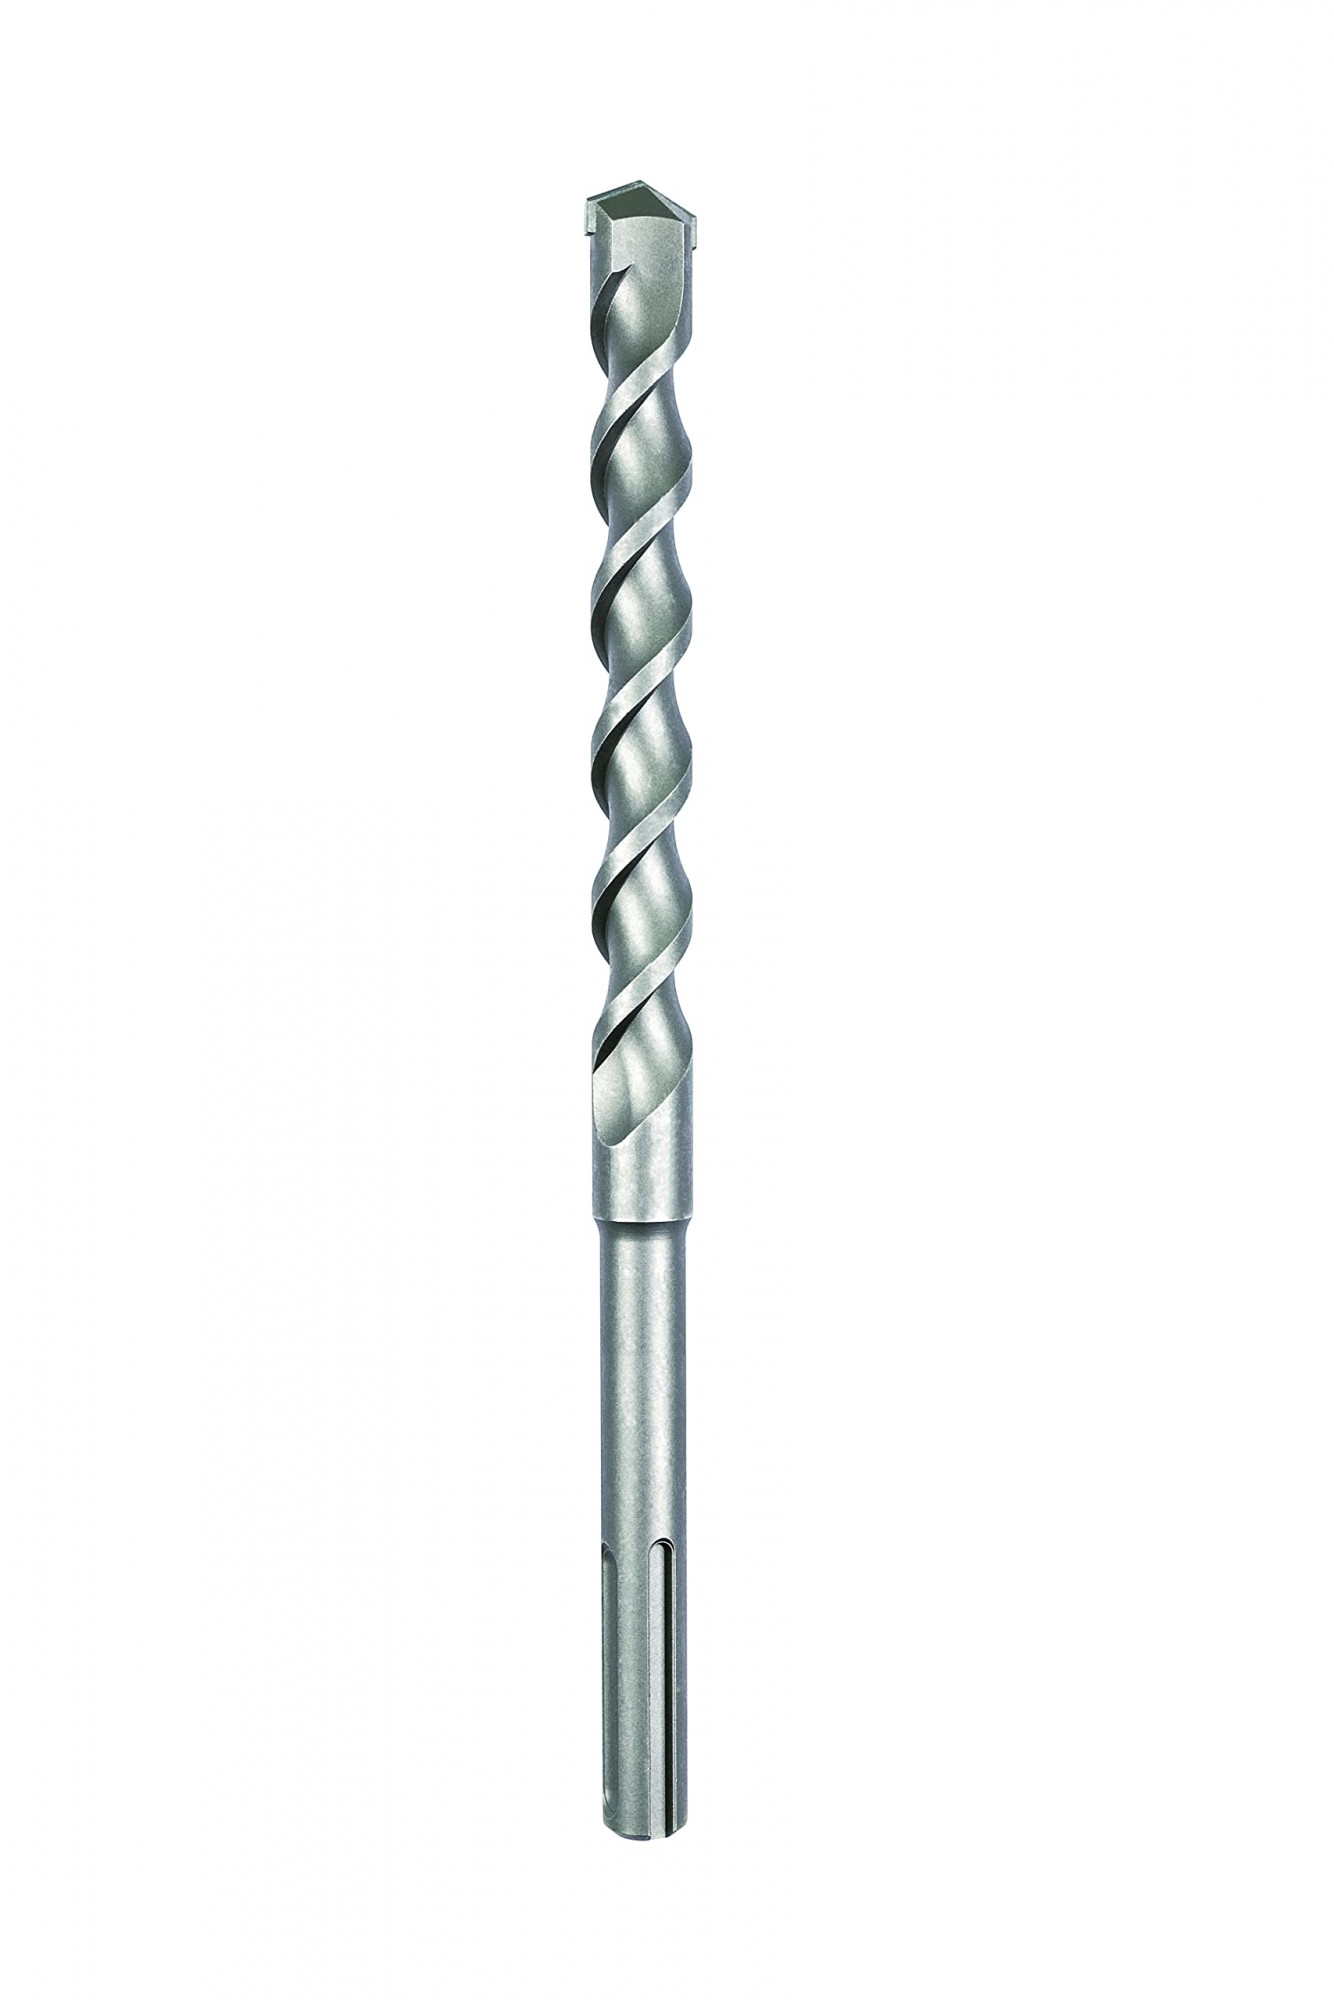 Bosch Professional SDS Max 2 Hammer Drill Bit With 2 Flute, Diameter 25mm, Working Length-195mm, Total Length 340mm, Pack Of 1